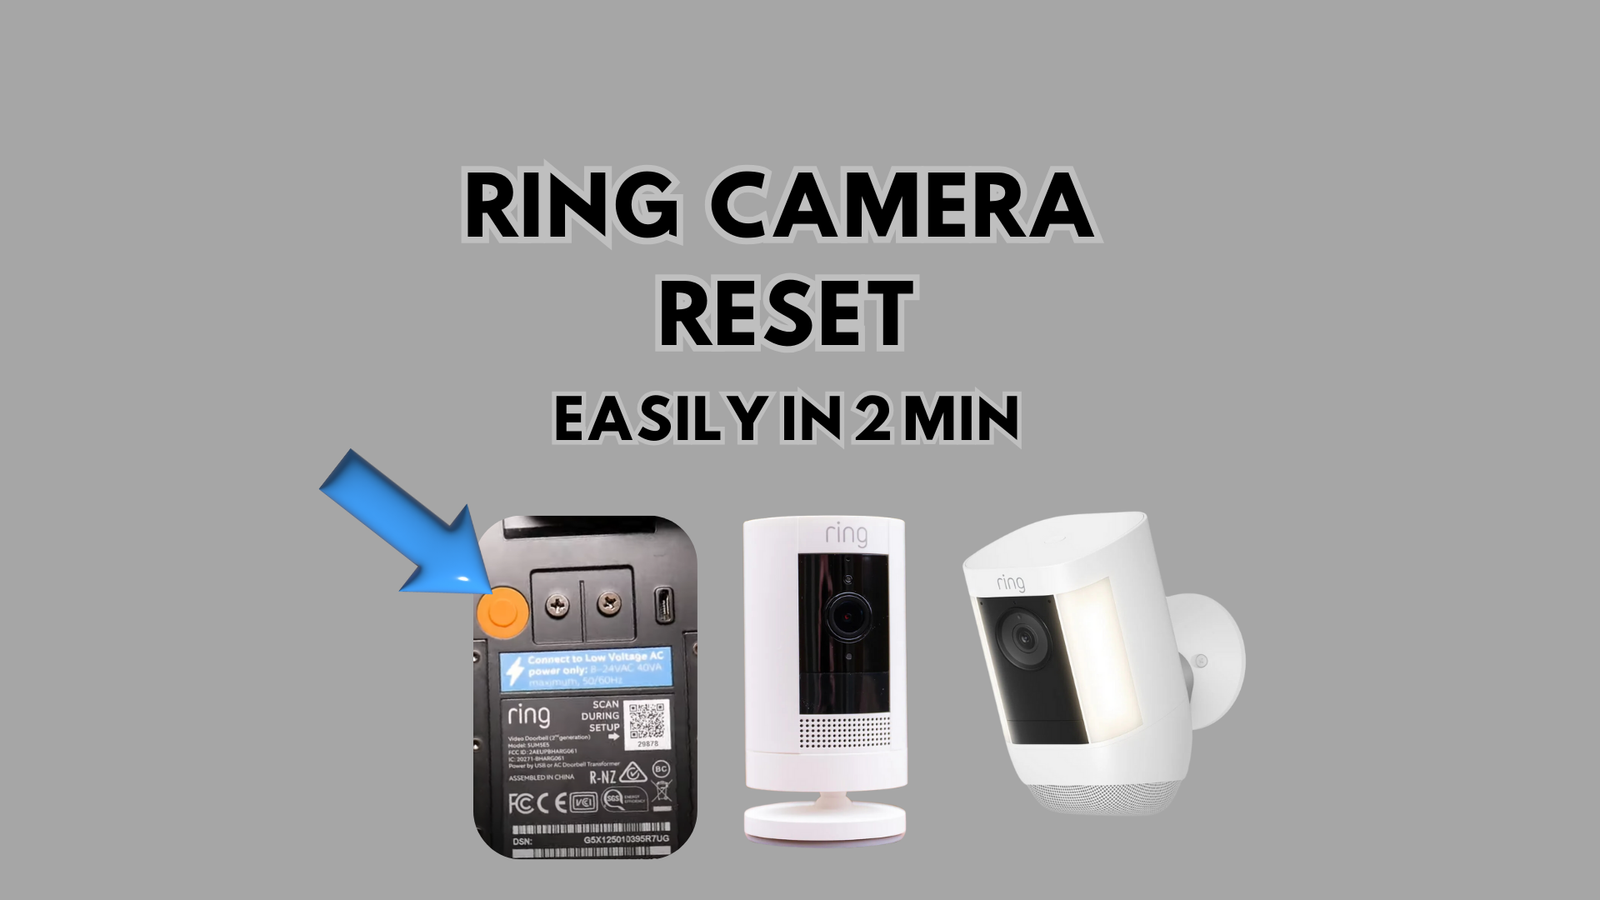 How to Reset a Ring Camera